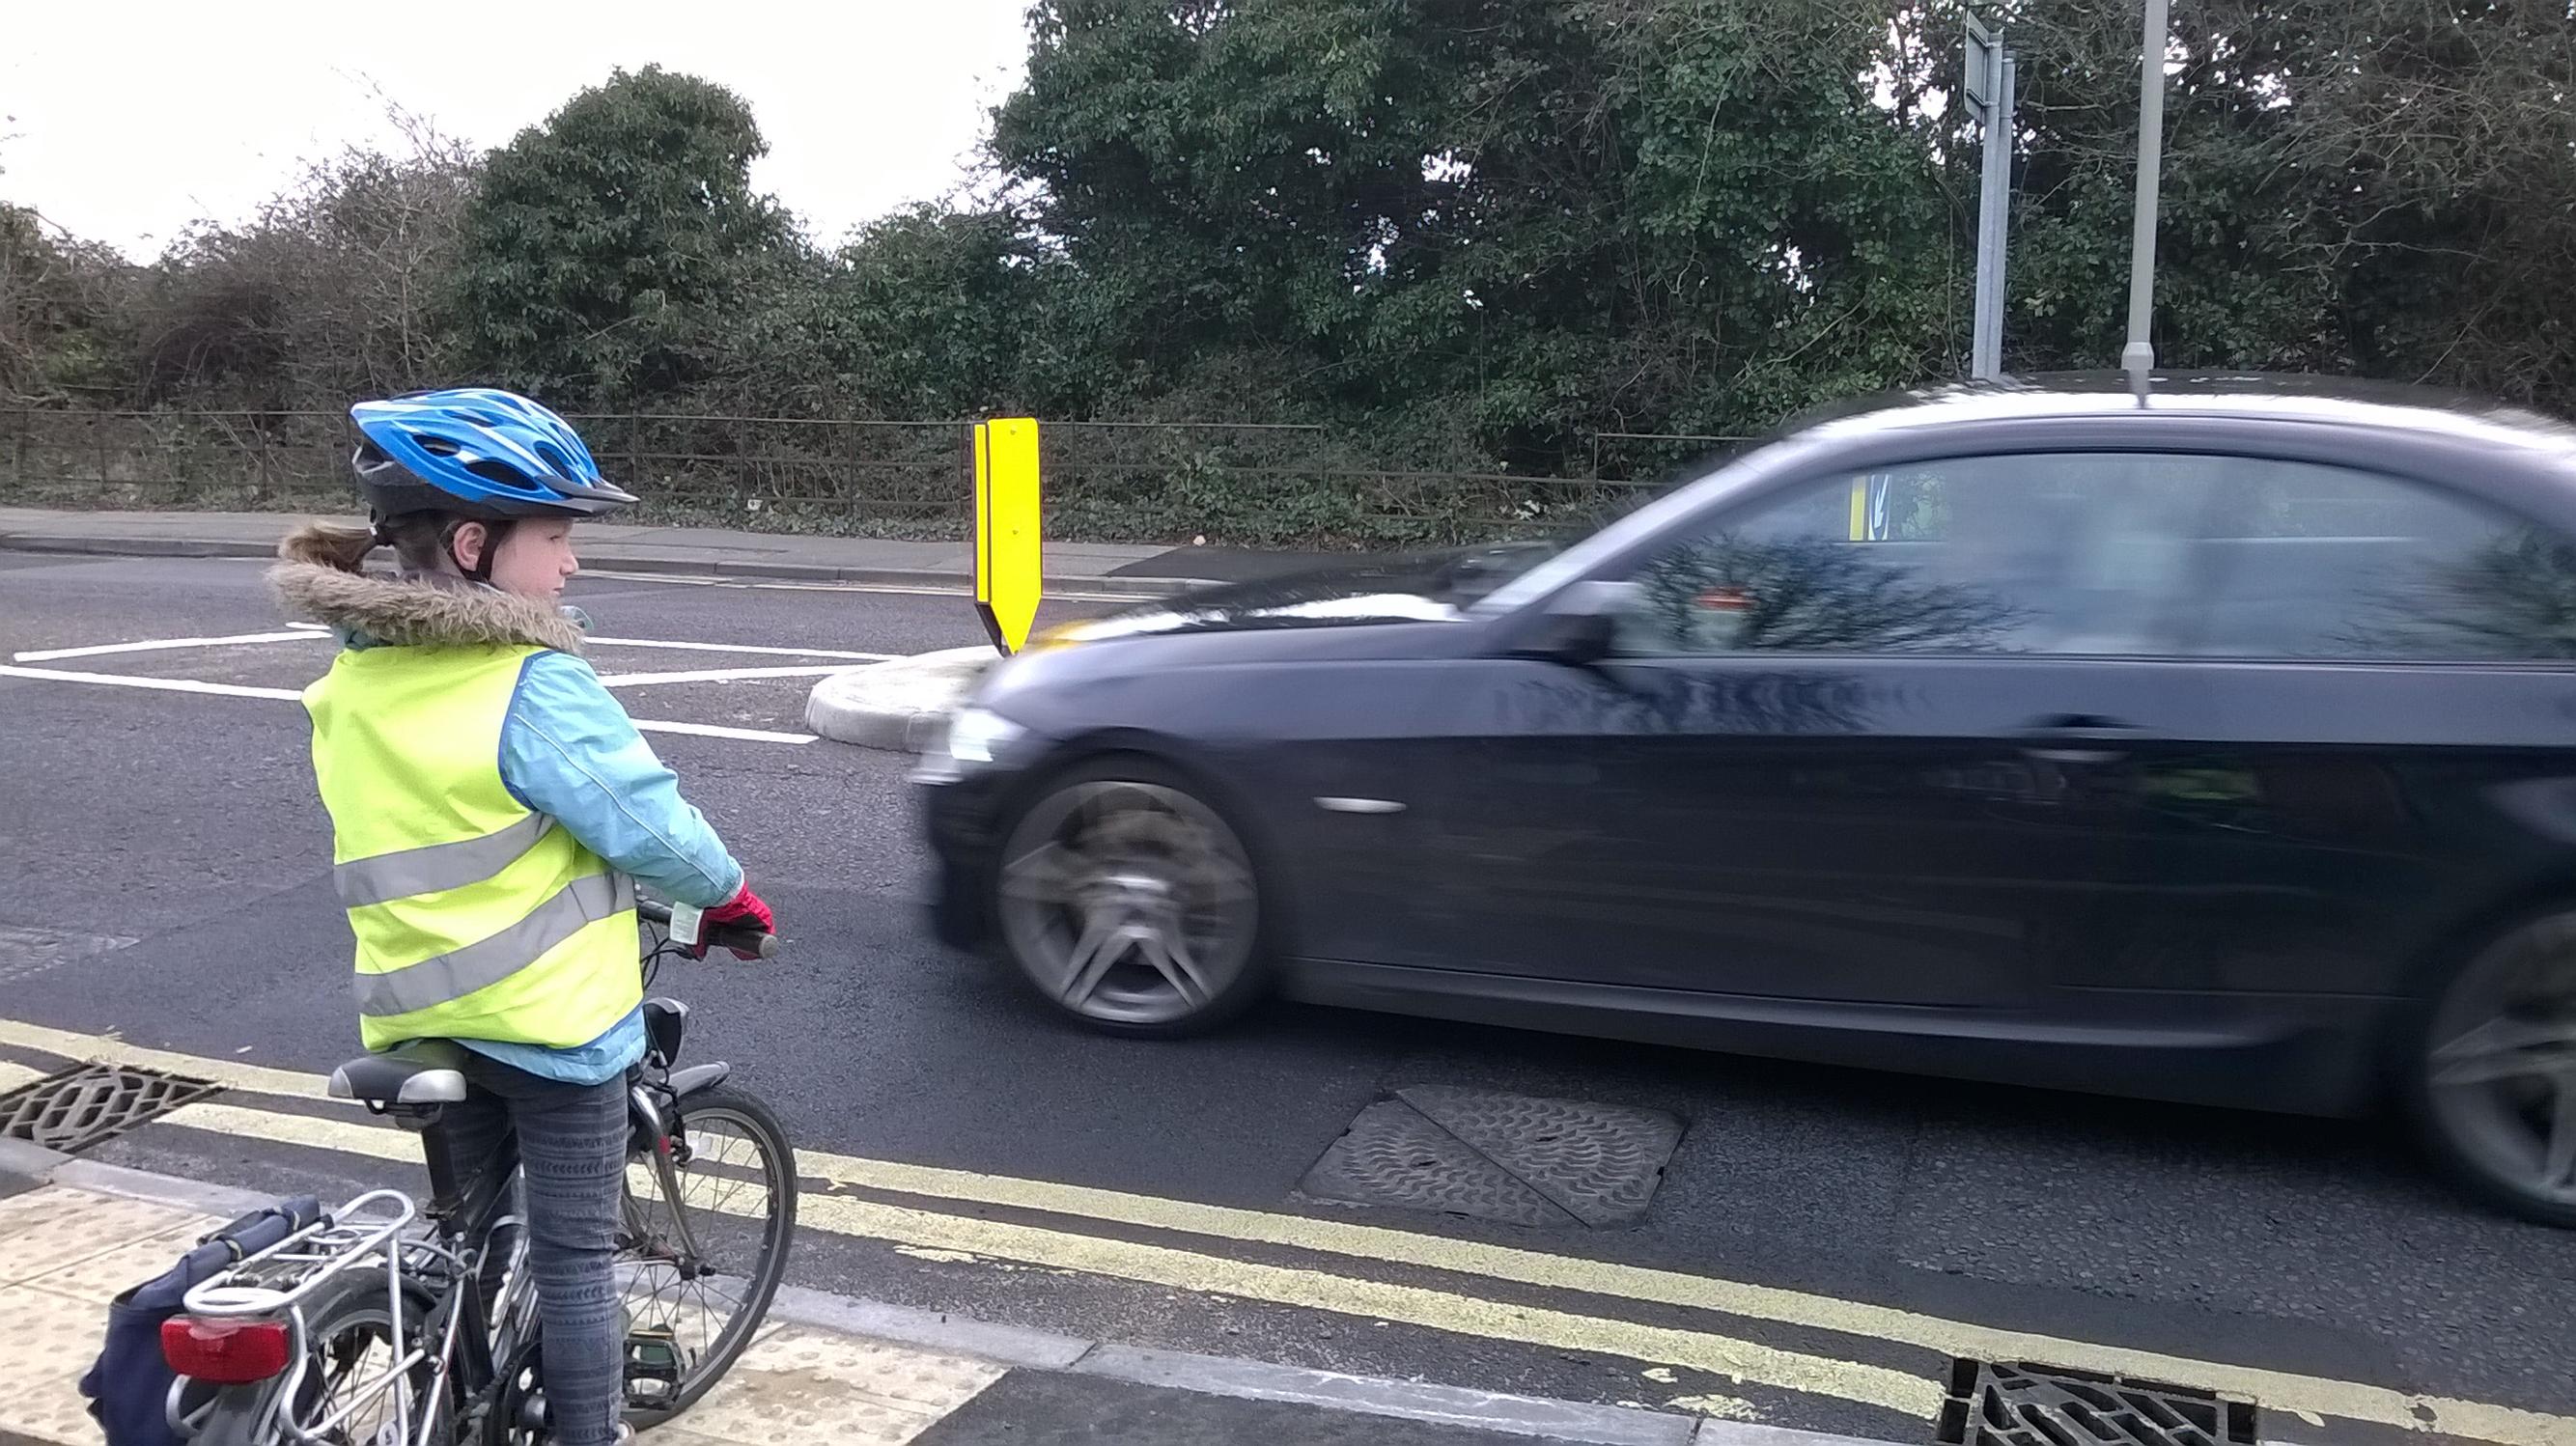 Children are often described as ‘vulnerable road users’ which shifts the focus onto the potential victim rather than the external facts such as insufficient priority crossings